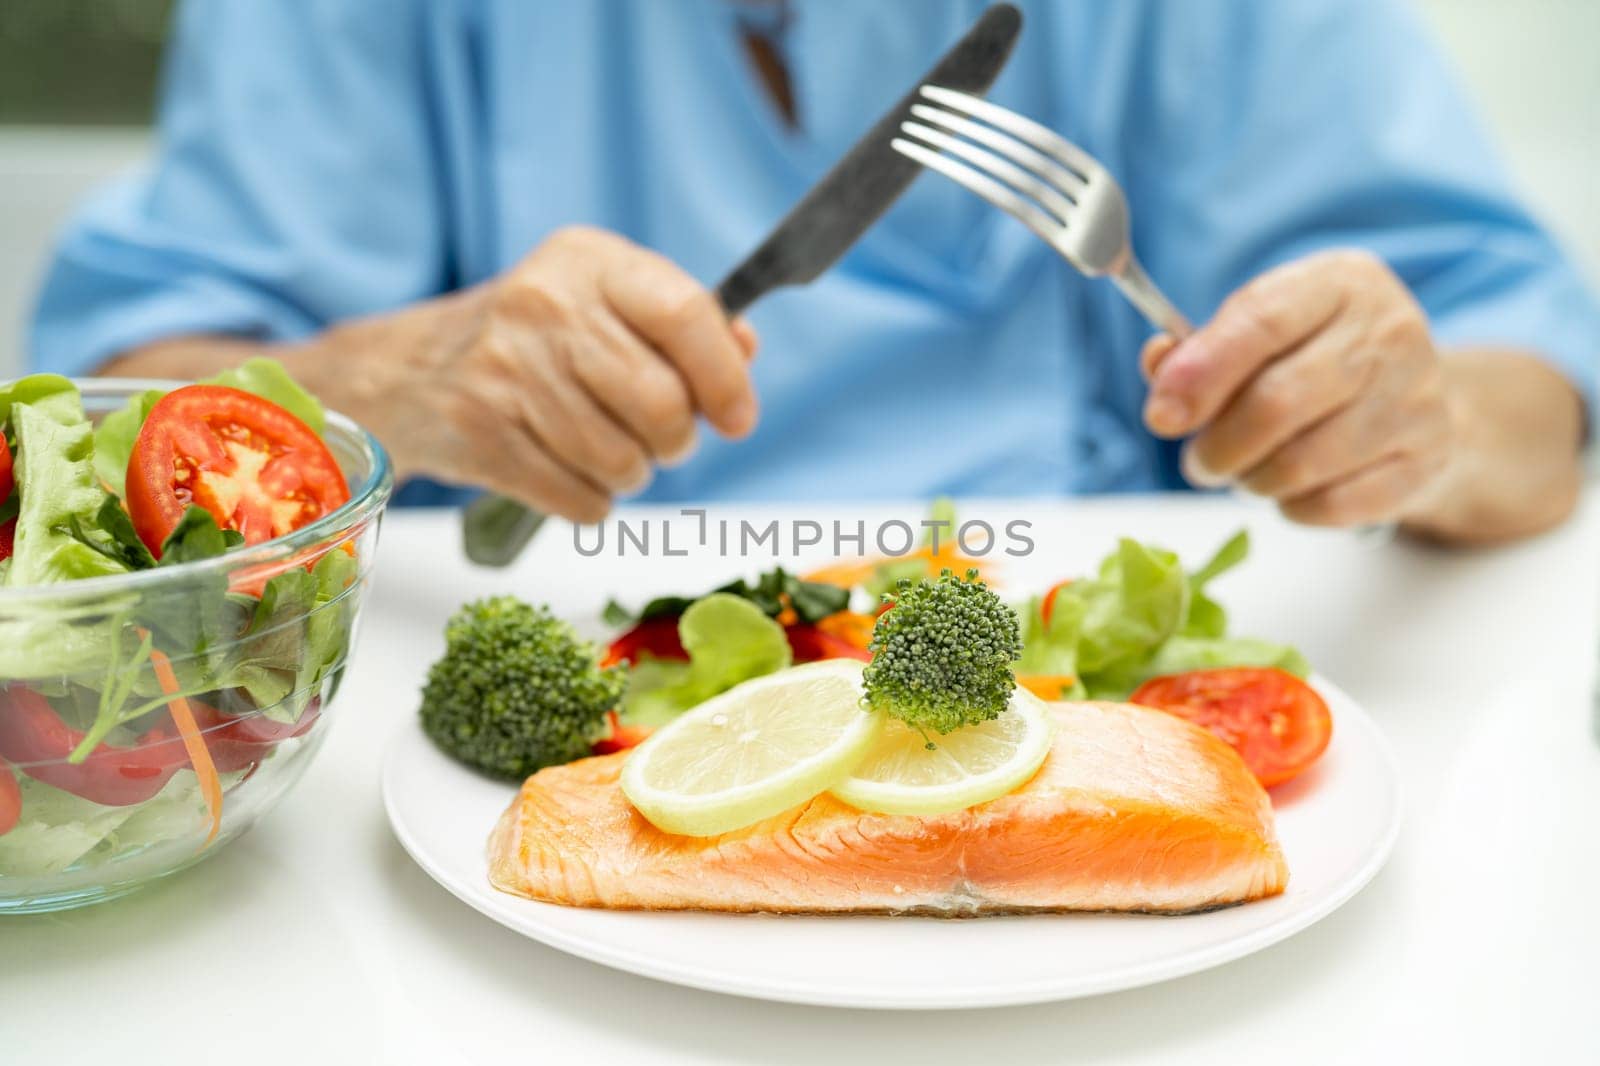 Asian elderly woman patient eating Salmon steak breakfast with vegetable healthy food while sitting and hungry on bed in hospital.